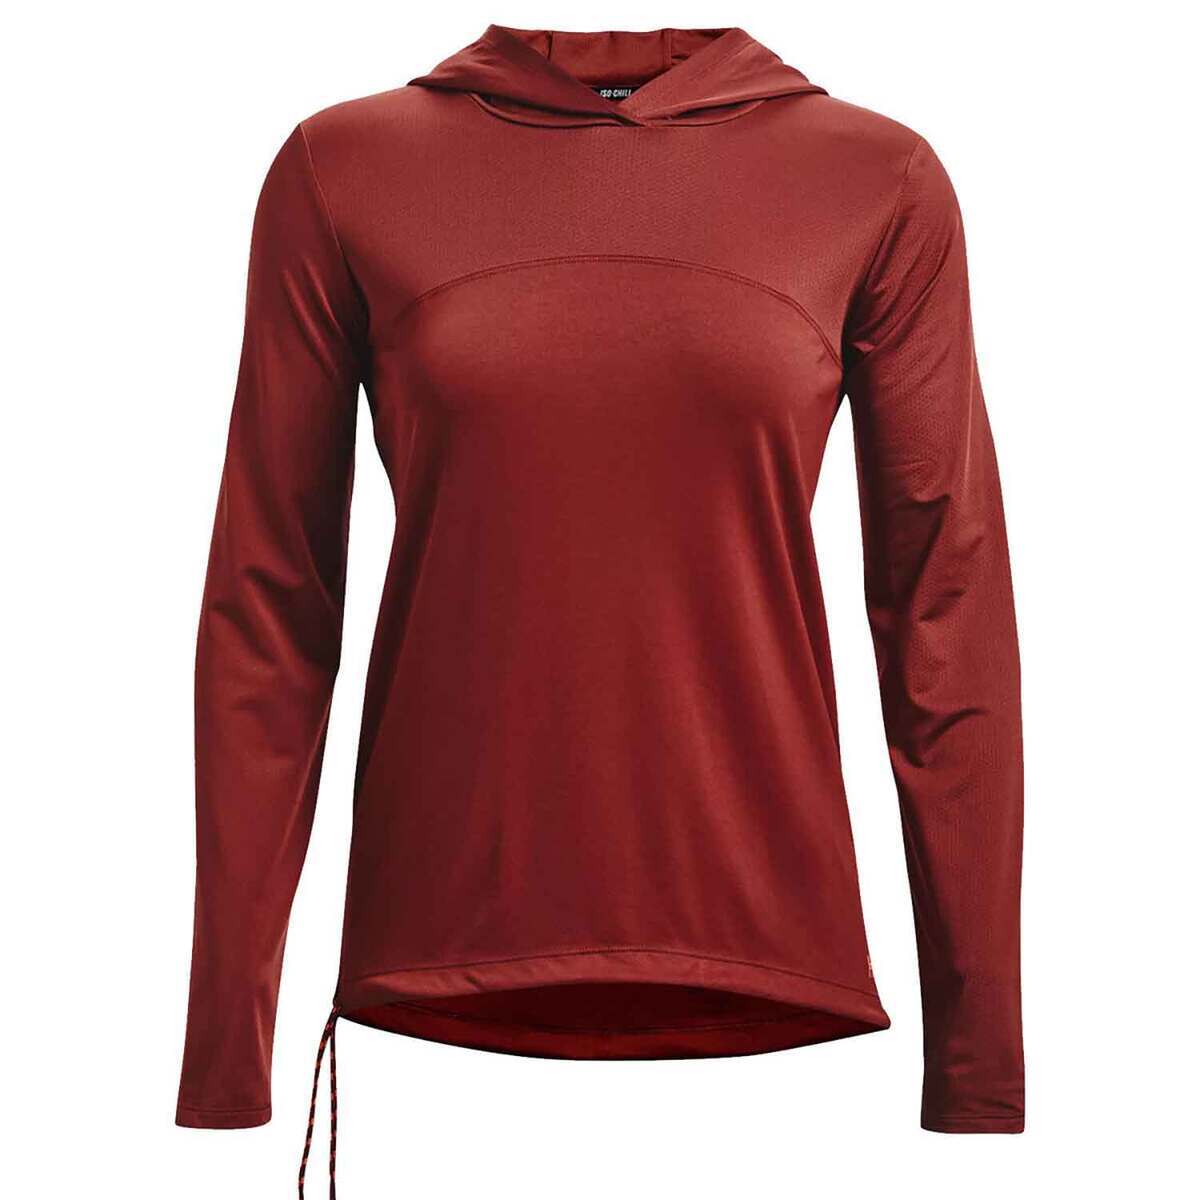 Under Armour Iso-Chill Shore Break Long-Sleeve Shirt for Ladies